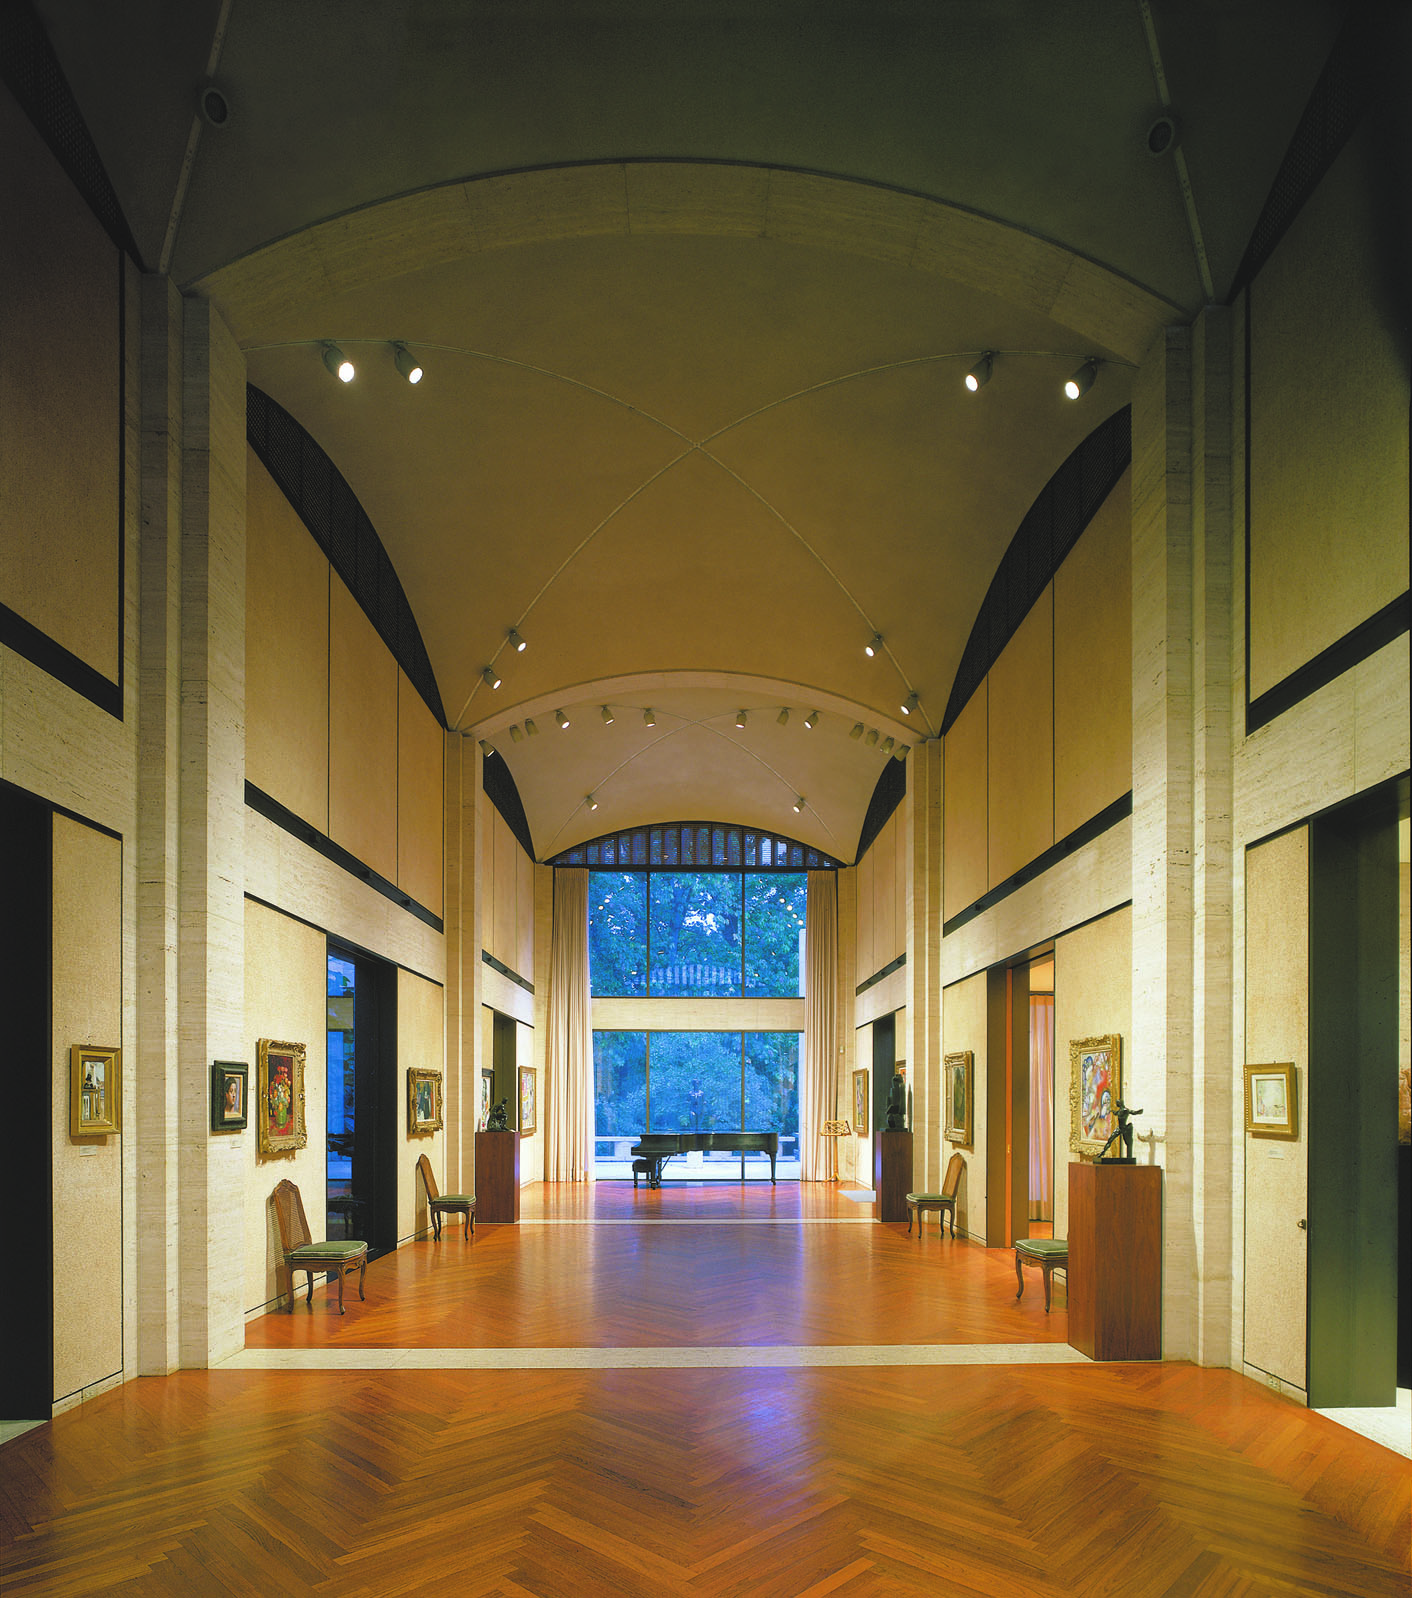 The Great Hall of the Kreeger Museum. Photograph by Robert Lautman, 2004, courtesy of the Kreeger Museum.